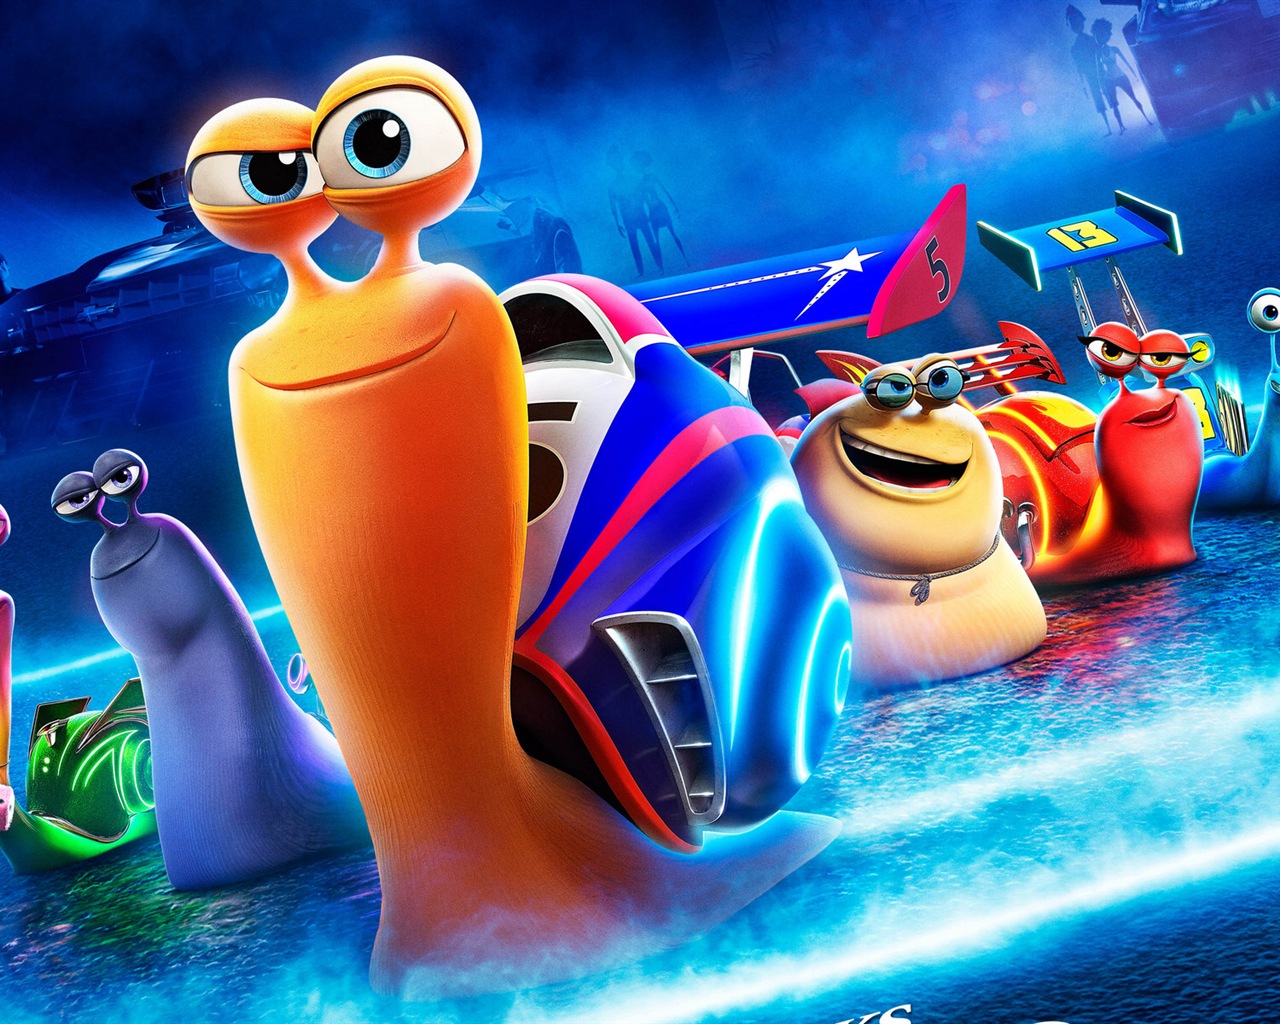 Turbo 3D movie HD wallpapers #1 - 1280x1024